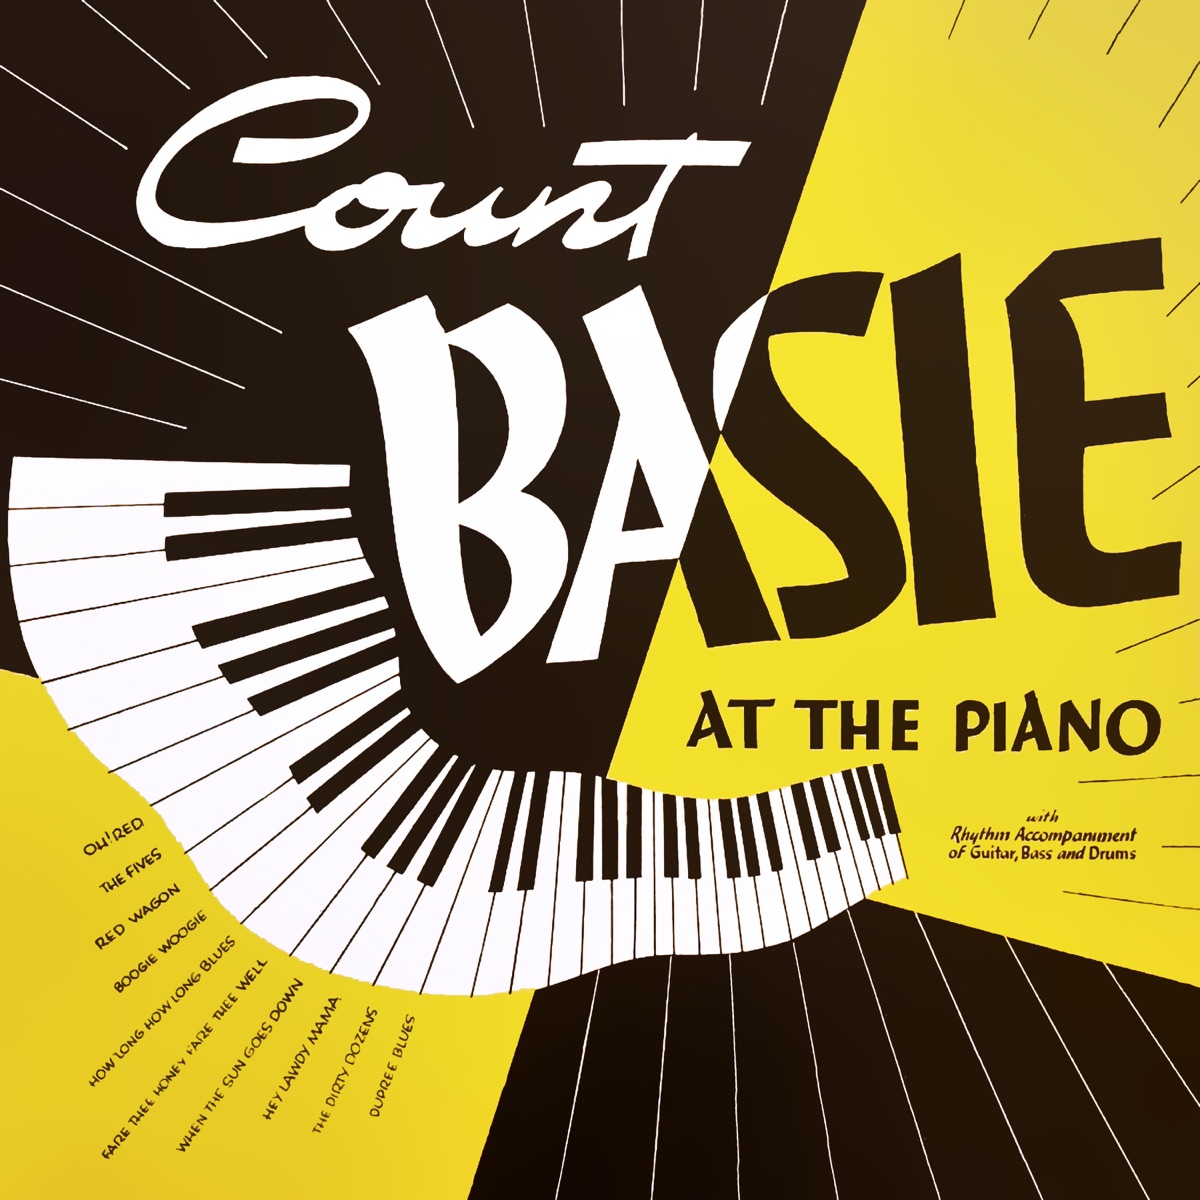 Chairman of the Board by Count Basie on Apple Music